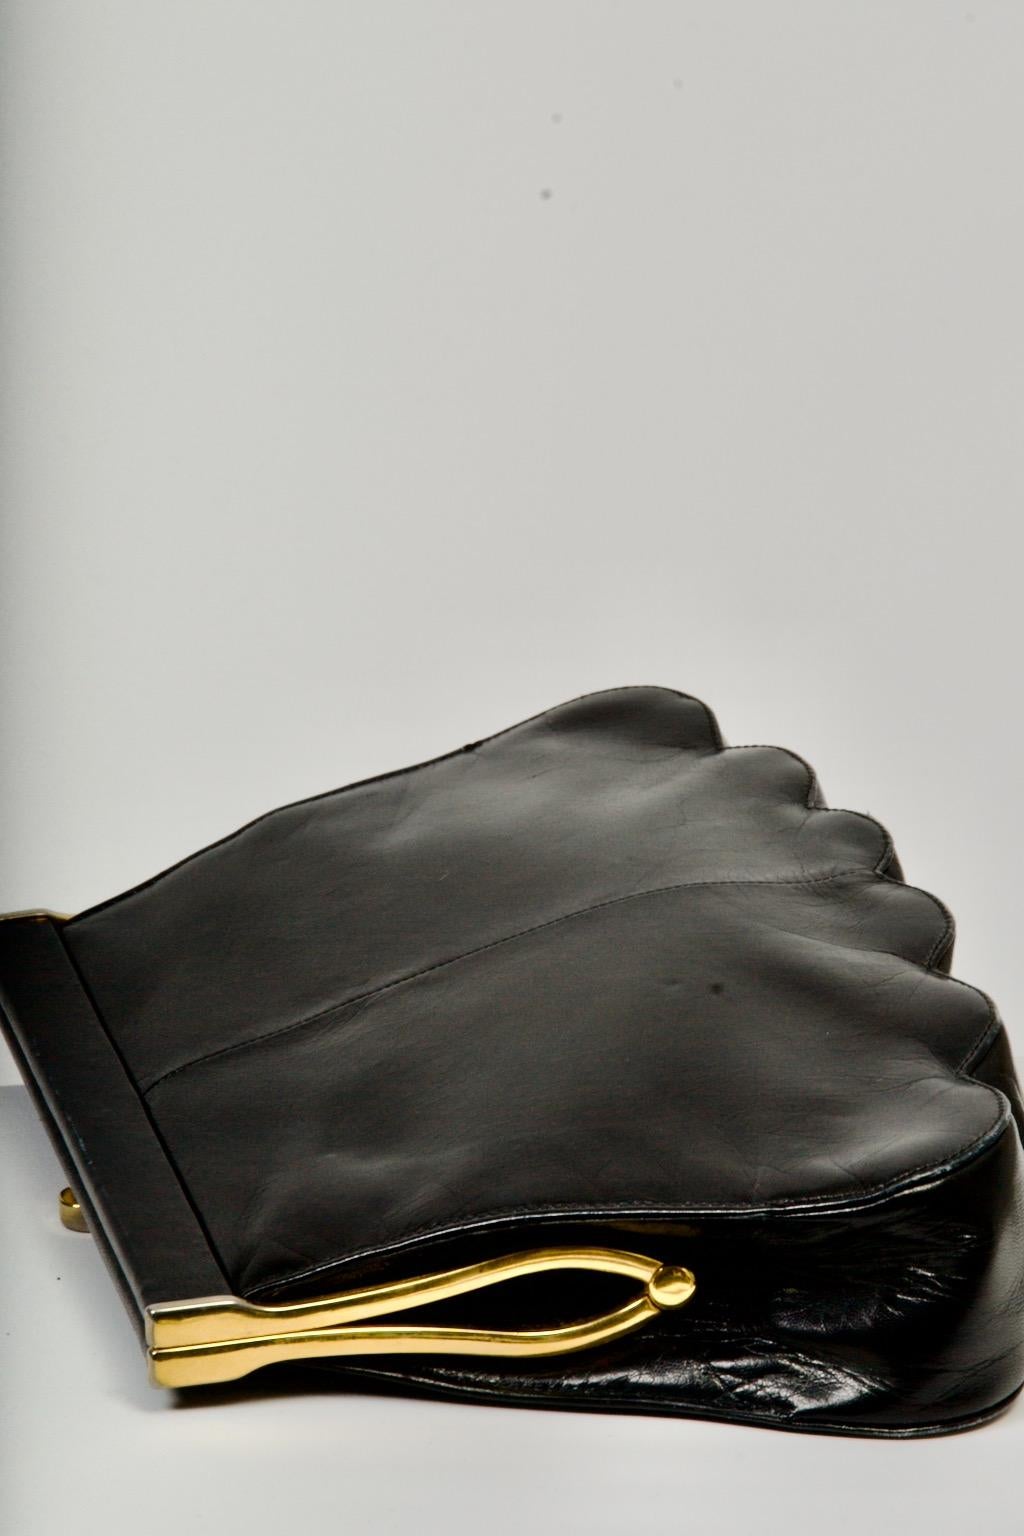 Charles Jourdan Black Leather Clutch In Good Condition For Sale In Alford, MA